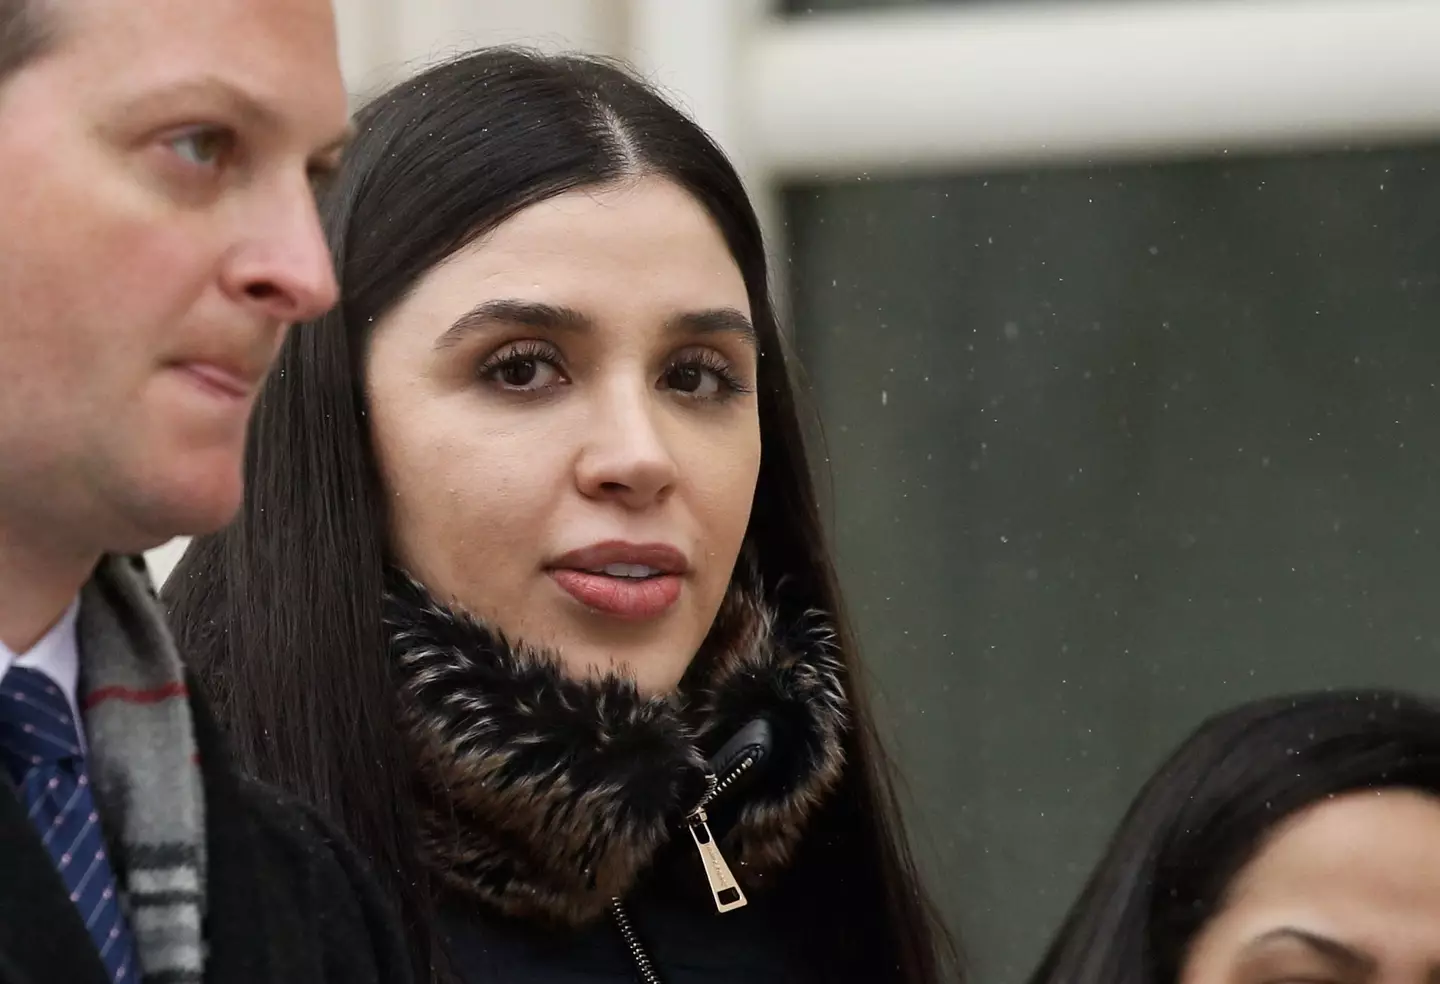 Emma Coronel Aispuro, the wife of El Chapo, has been released from prison.